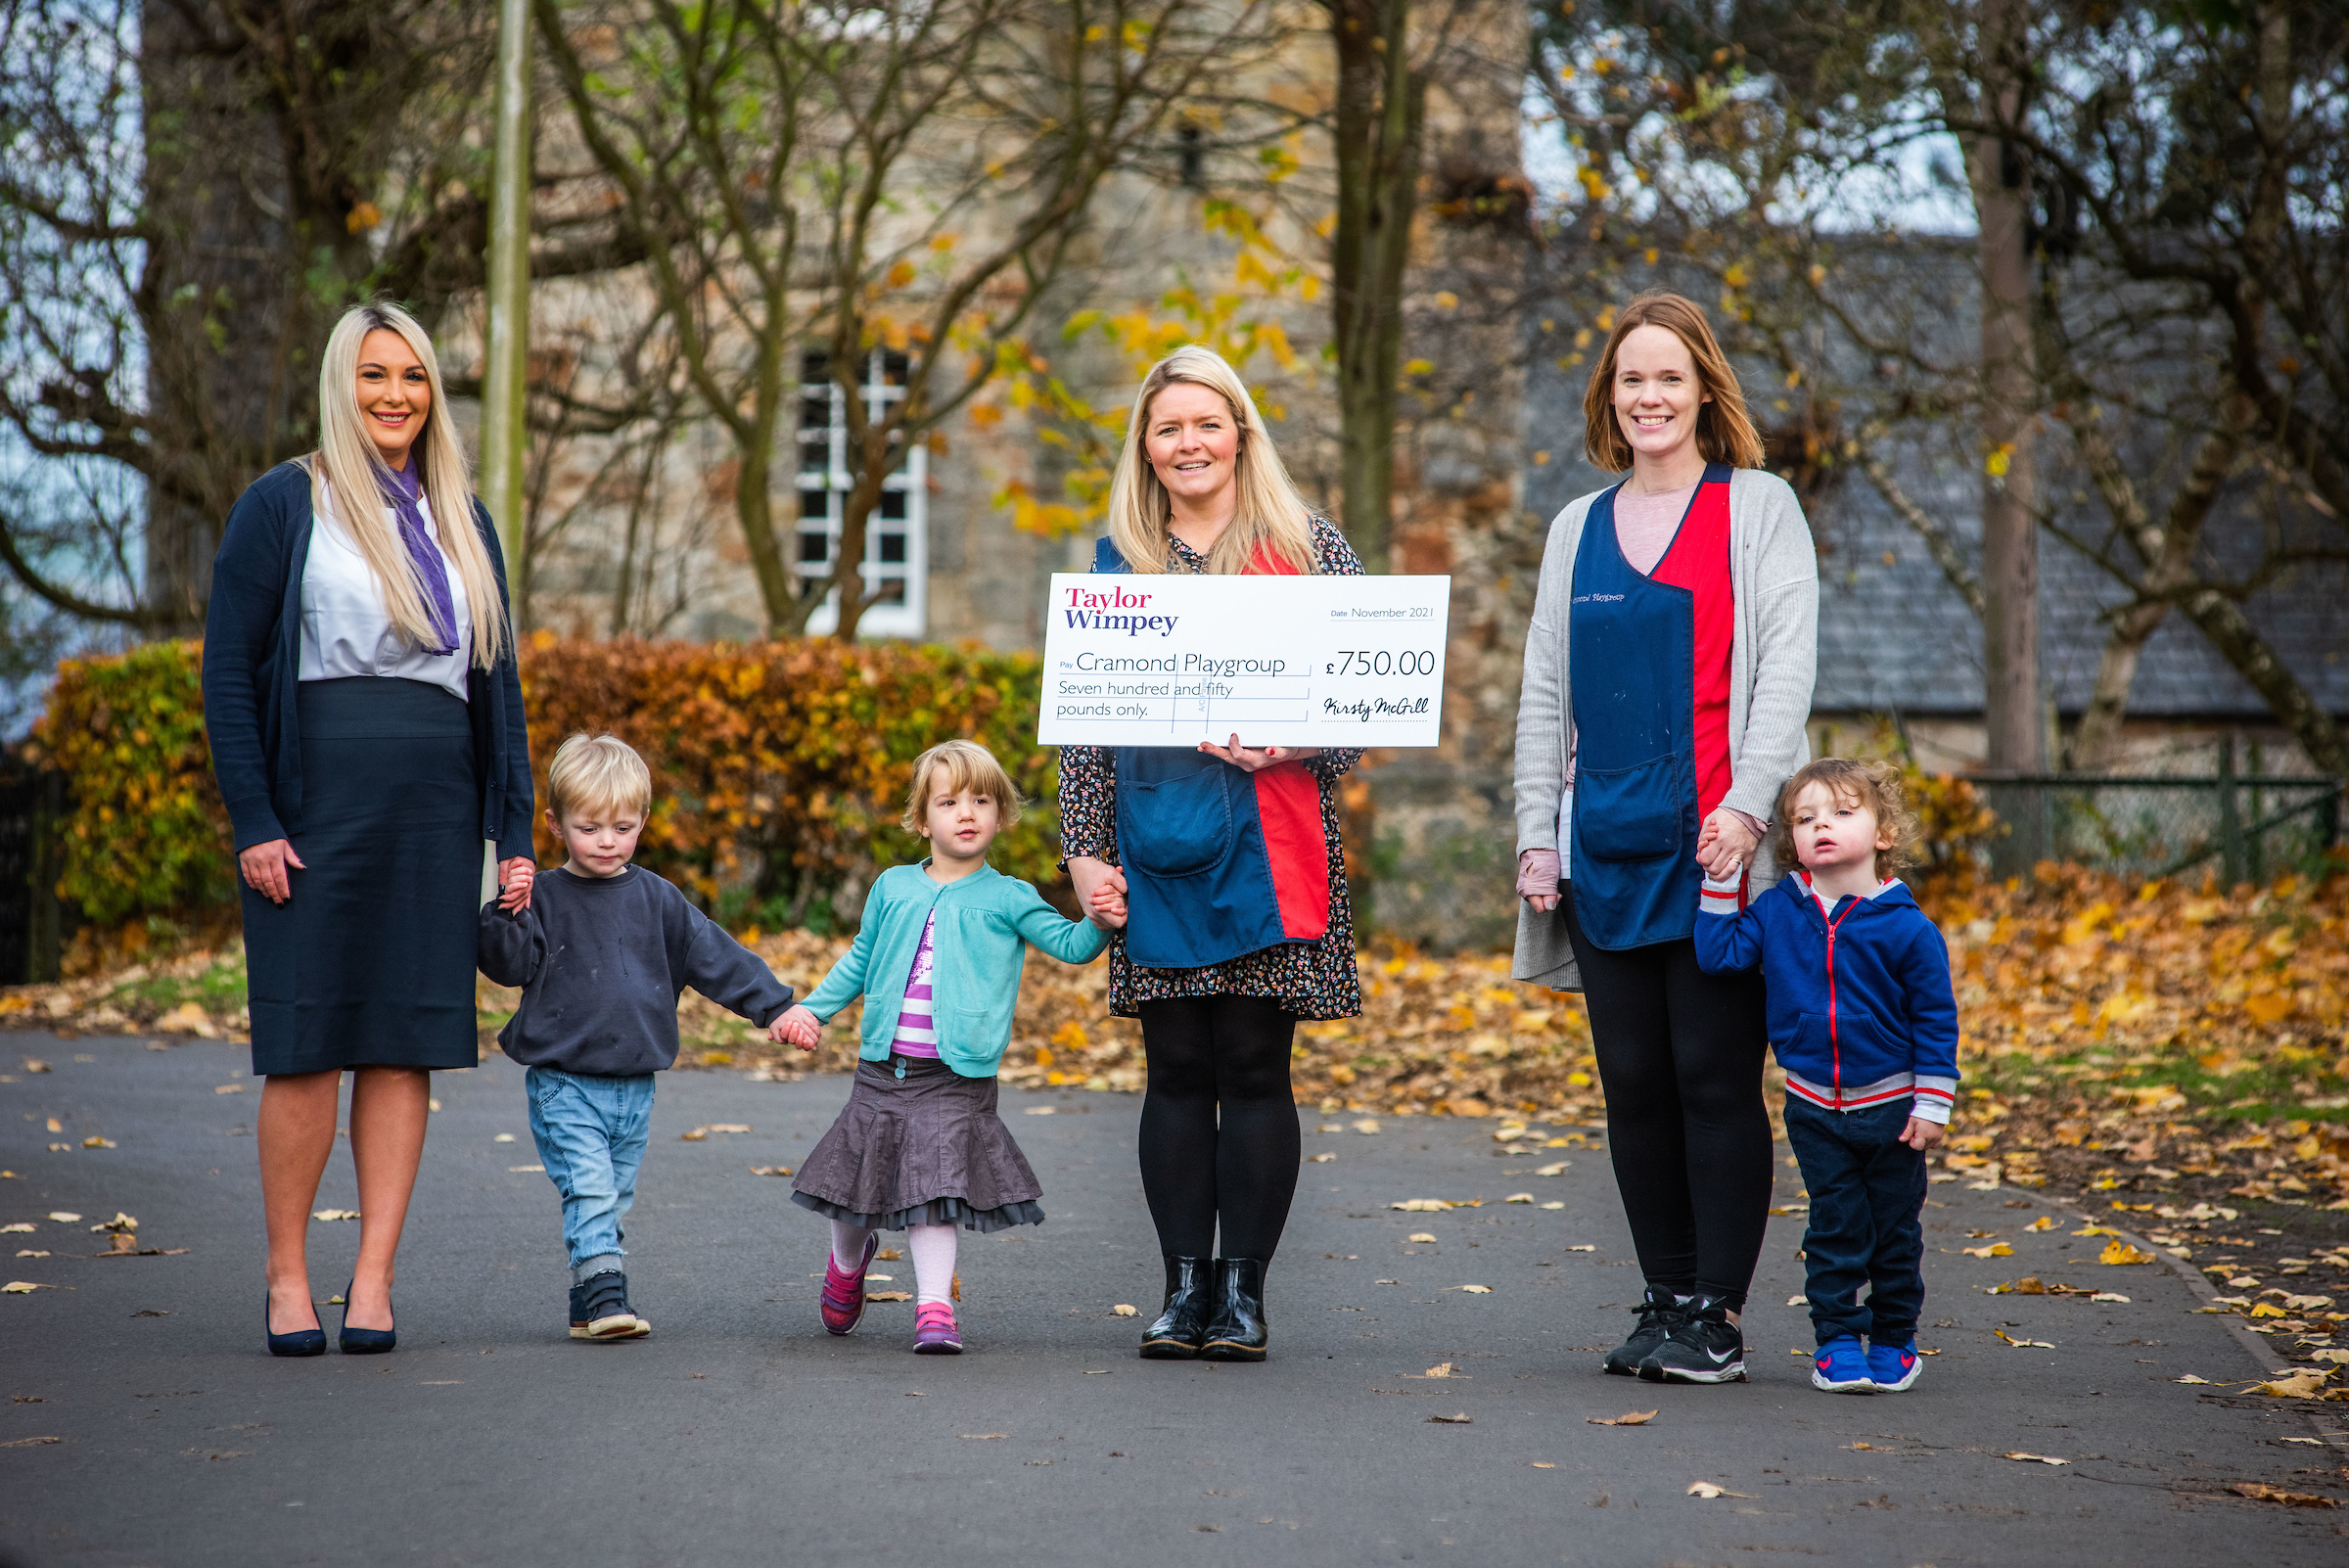 Edinburgh playgroup receives funding boost from Taylor Wimpey